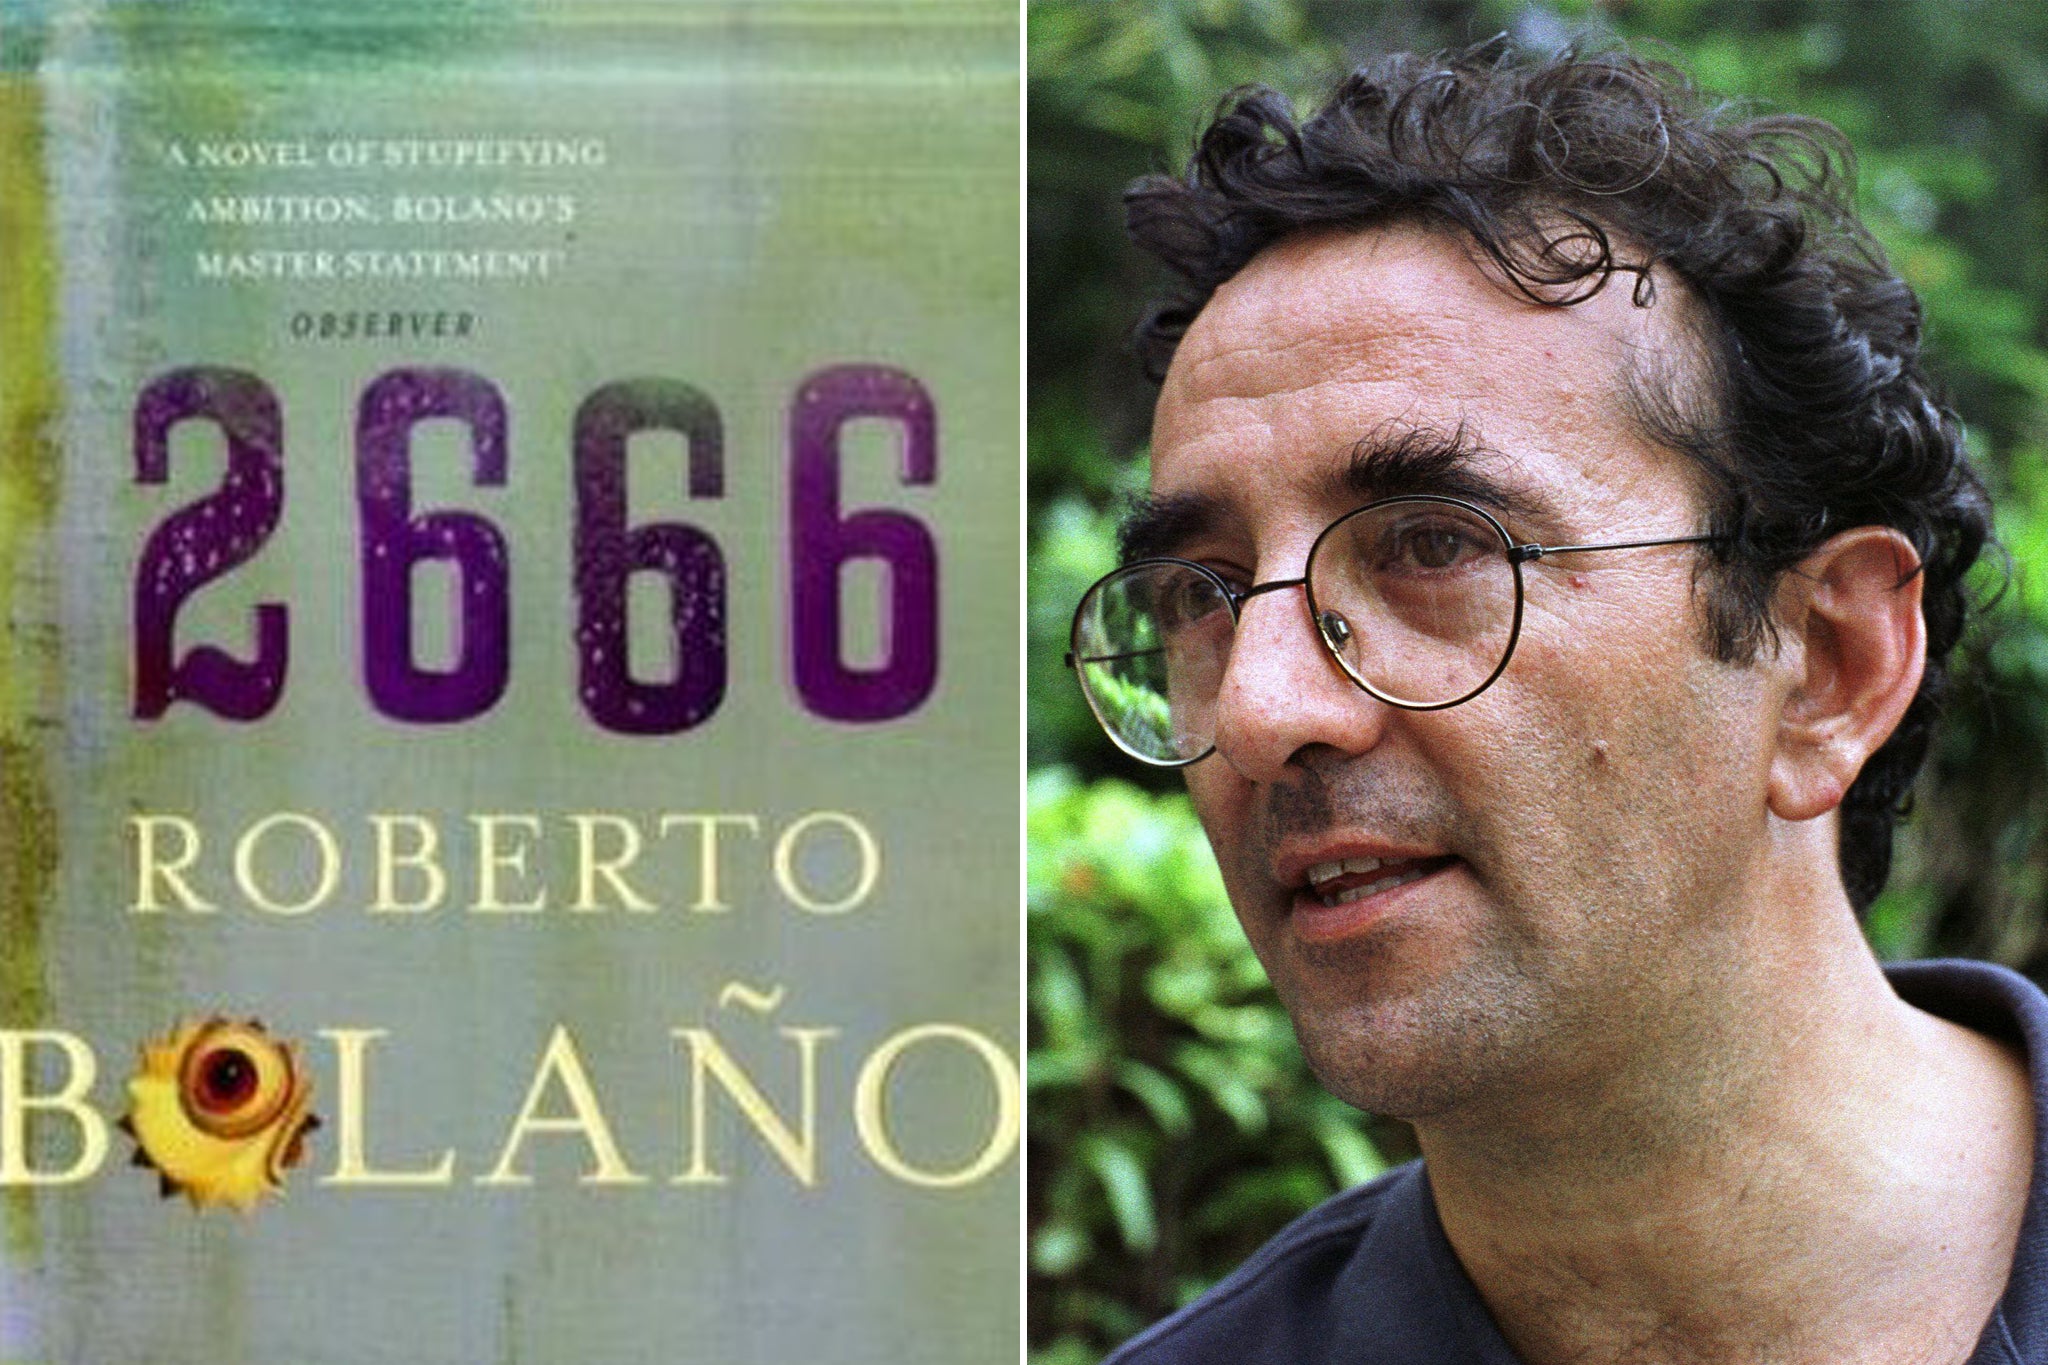 ‘2666’ was published posthumously but established Roberto Bolaño’s pre-eminence in Latin American literature